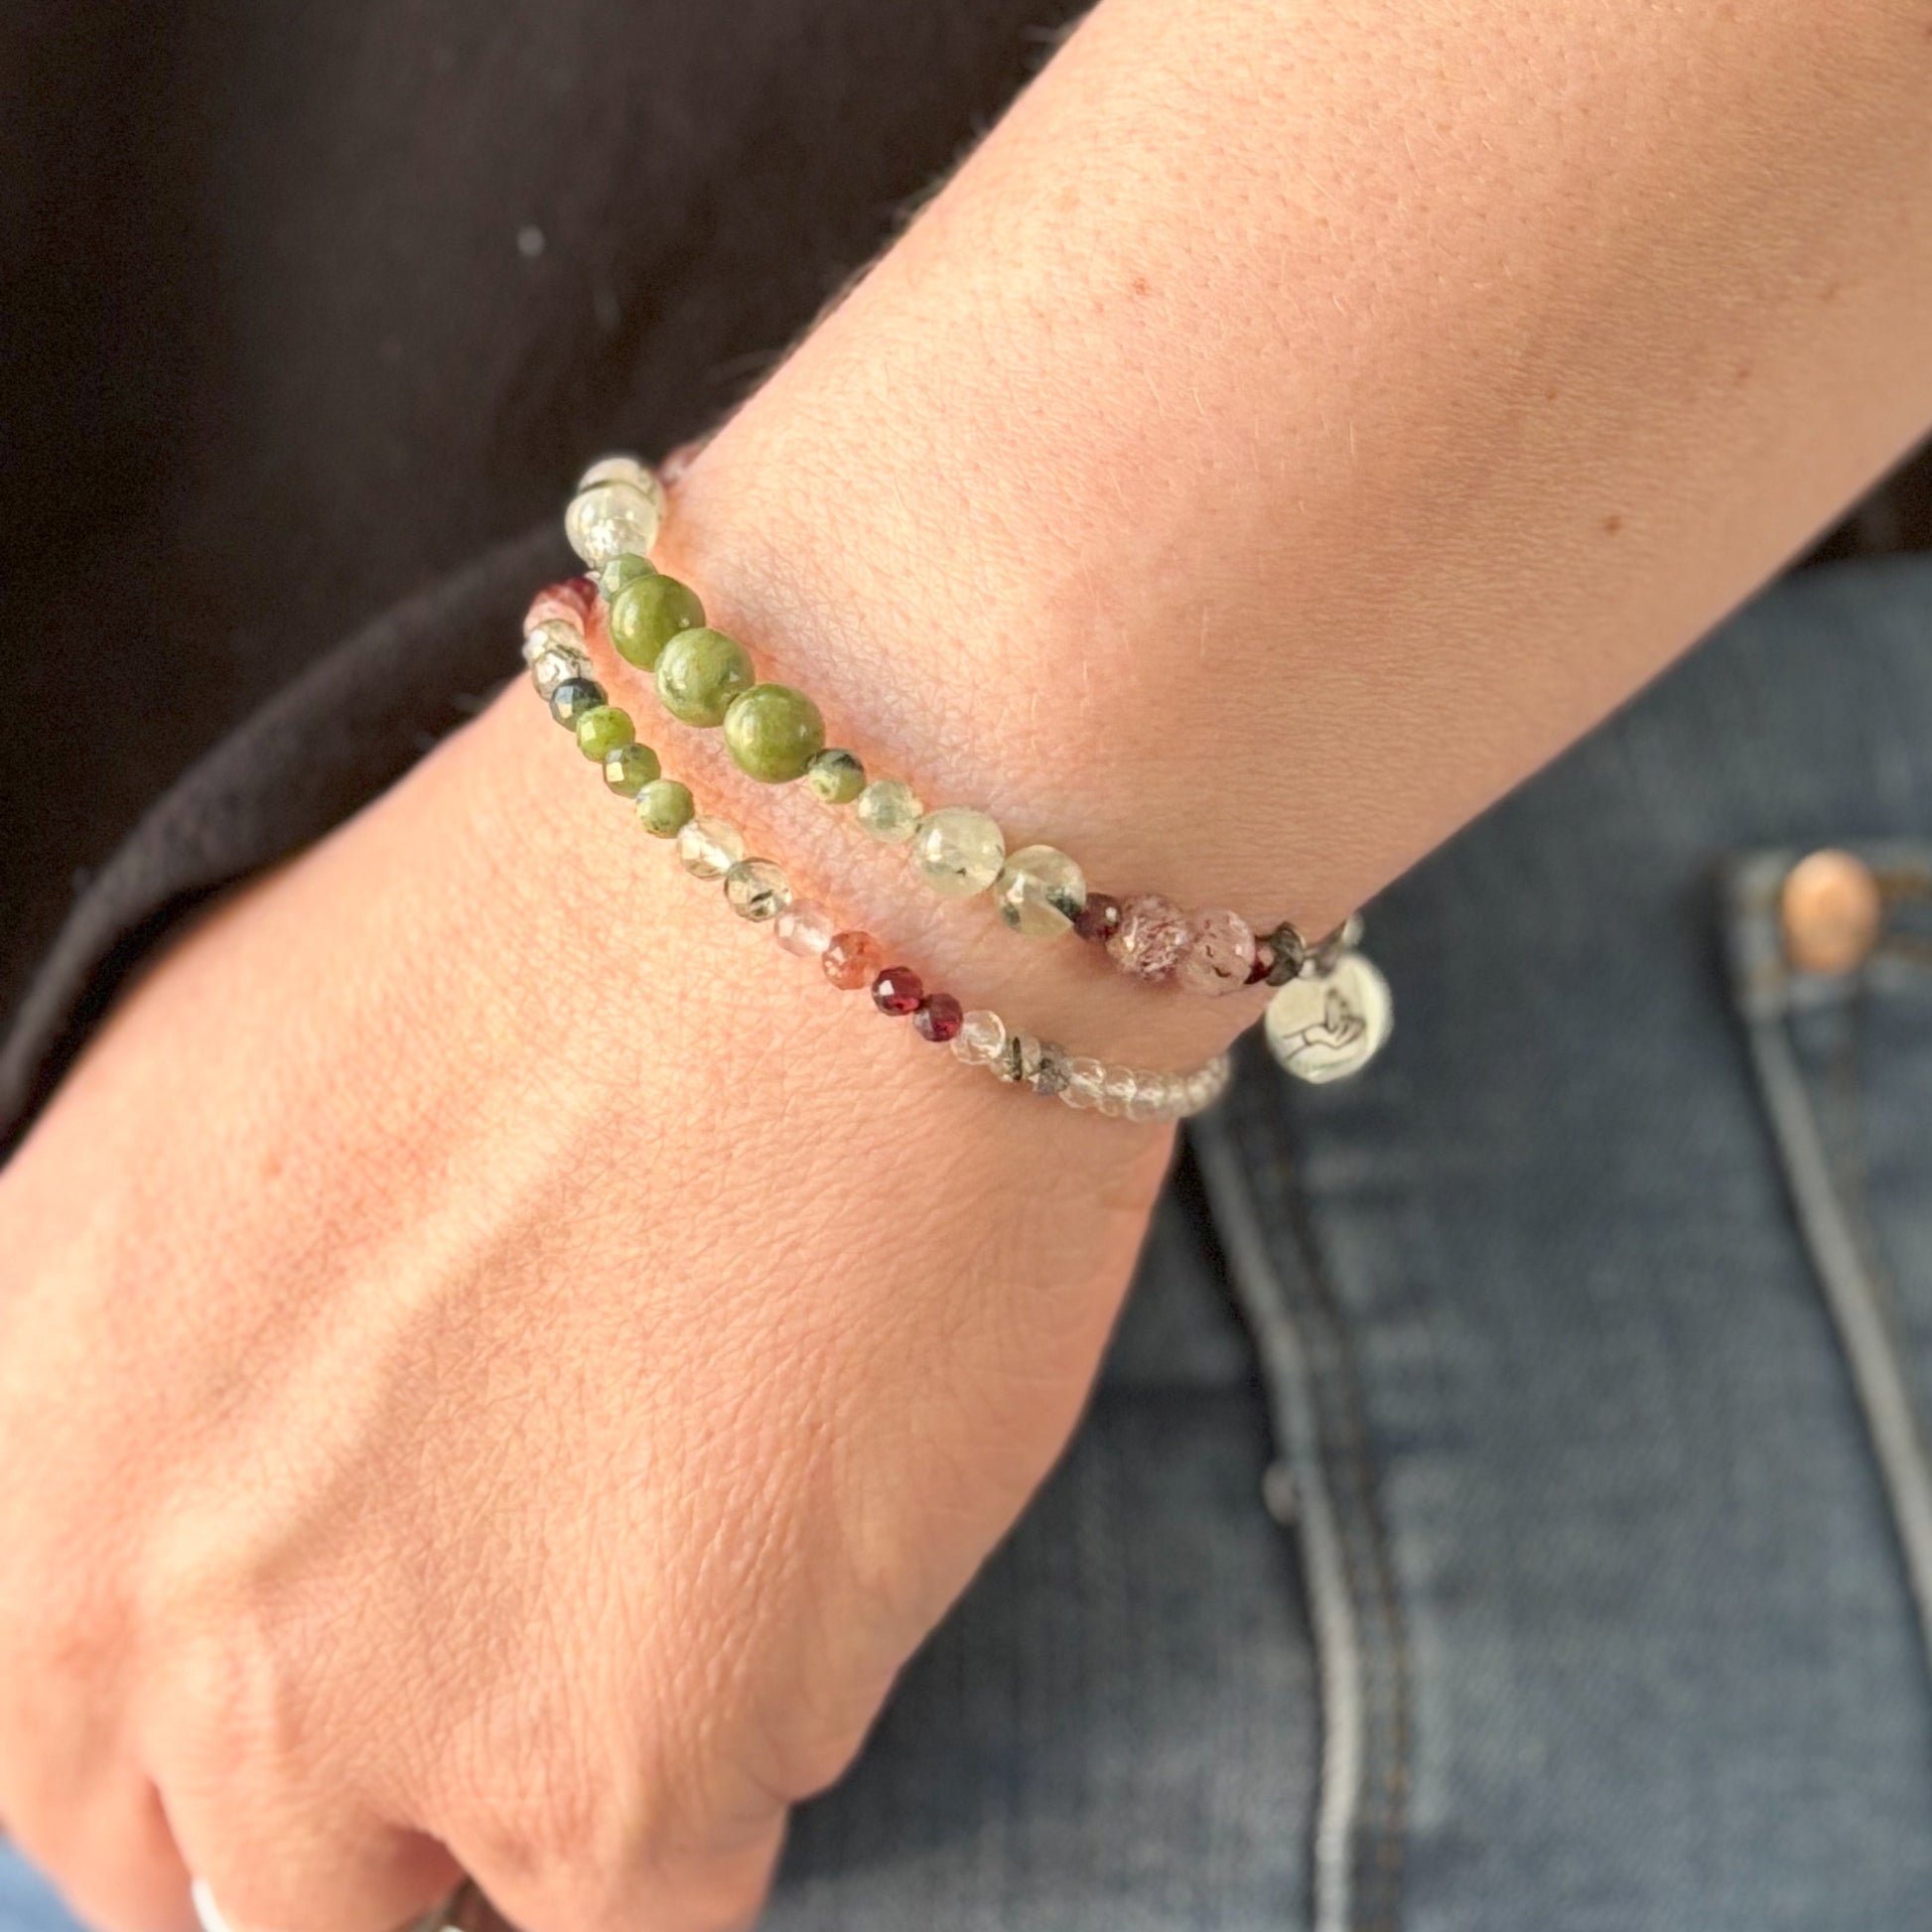 Handcrafted Crystal Bangle with Nephrite Jade and Strawberry Quartz